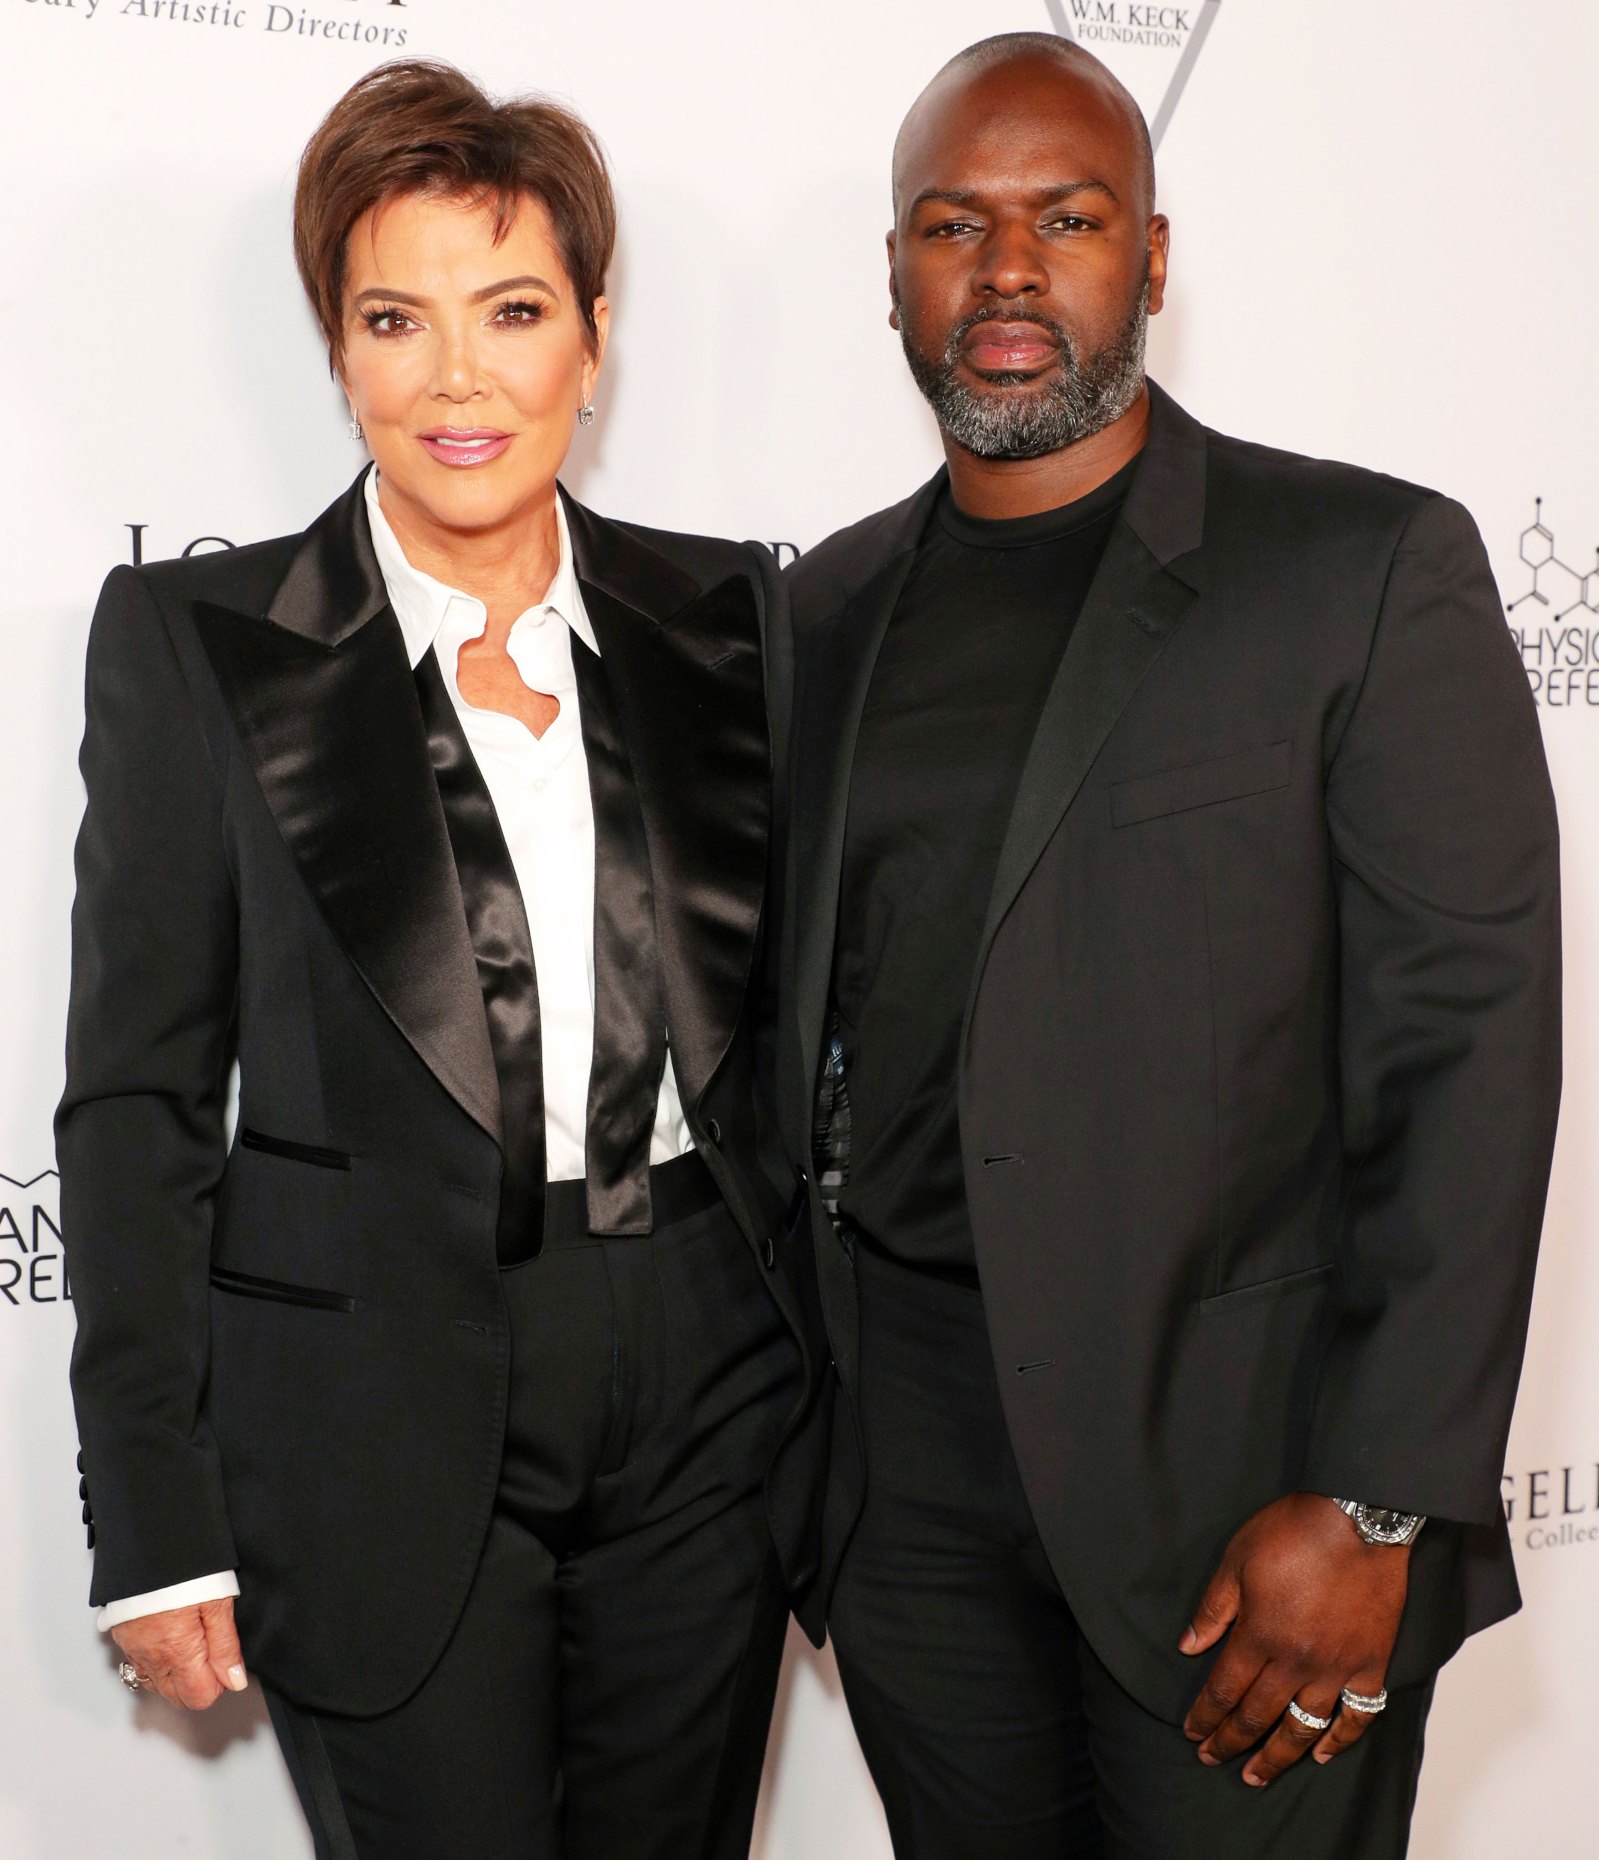 Kris Jenner Says She 'Always' Wants to Have Sex With Corey Gamble: 'I'm a Woman With Hormones'